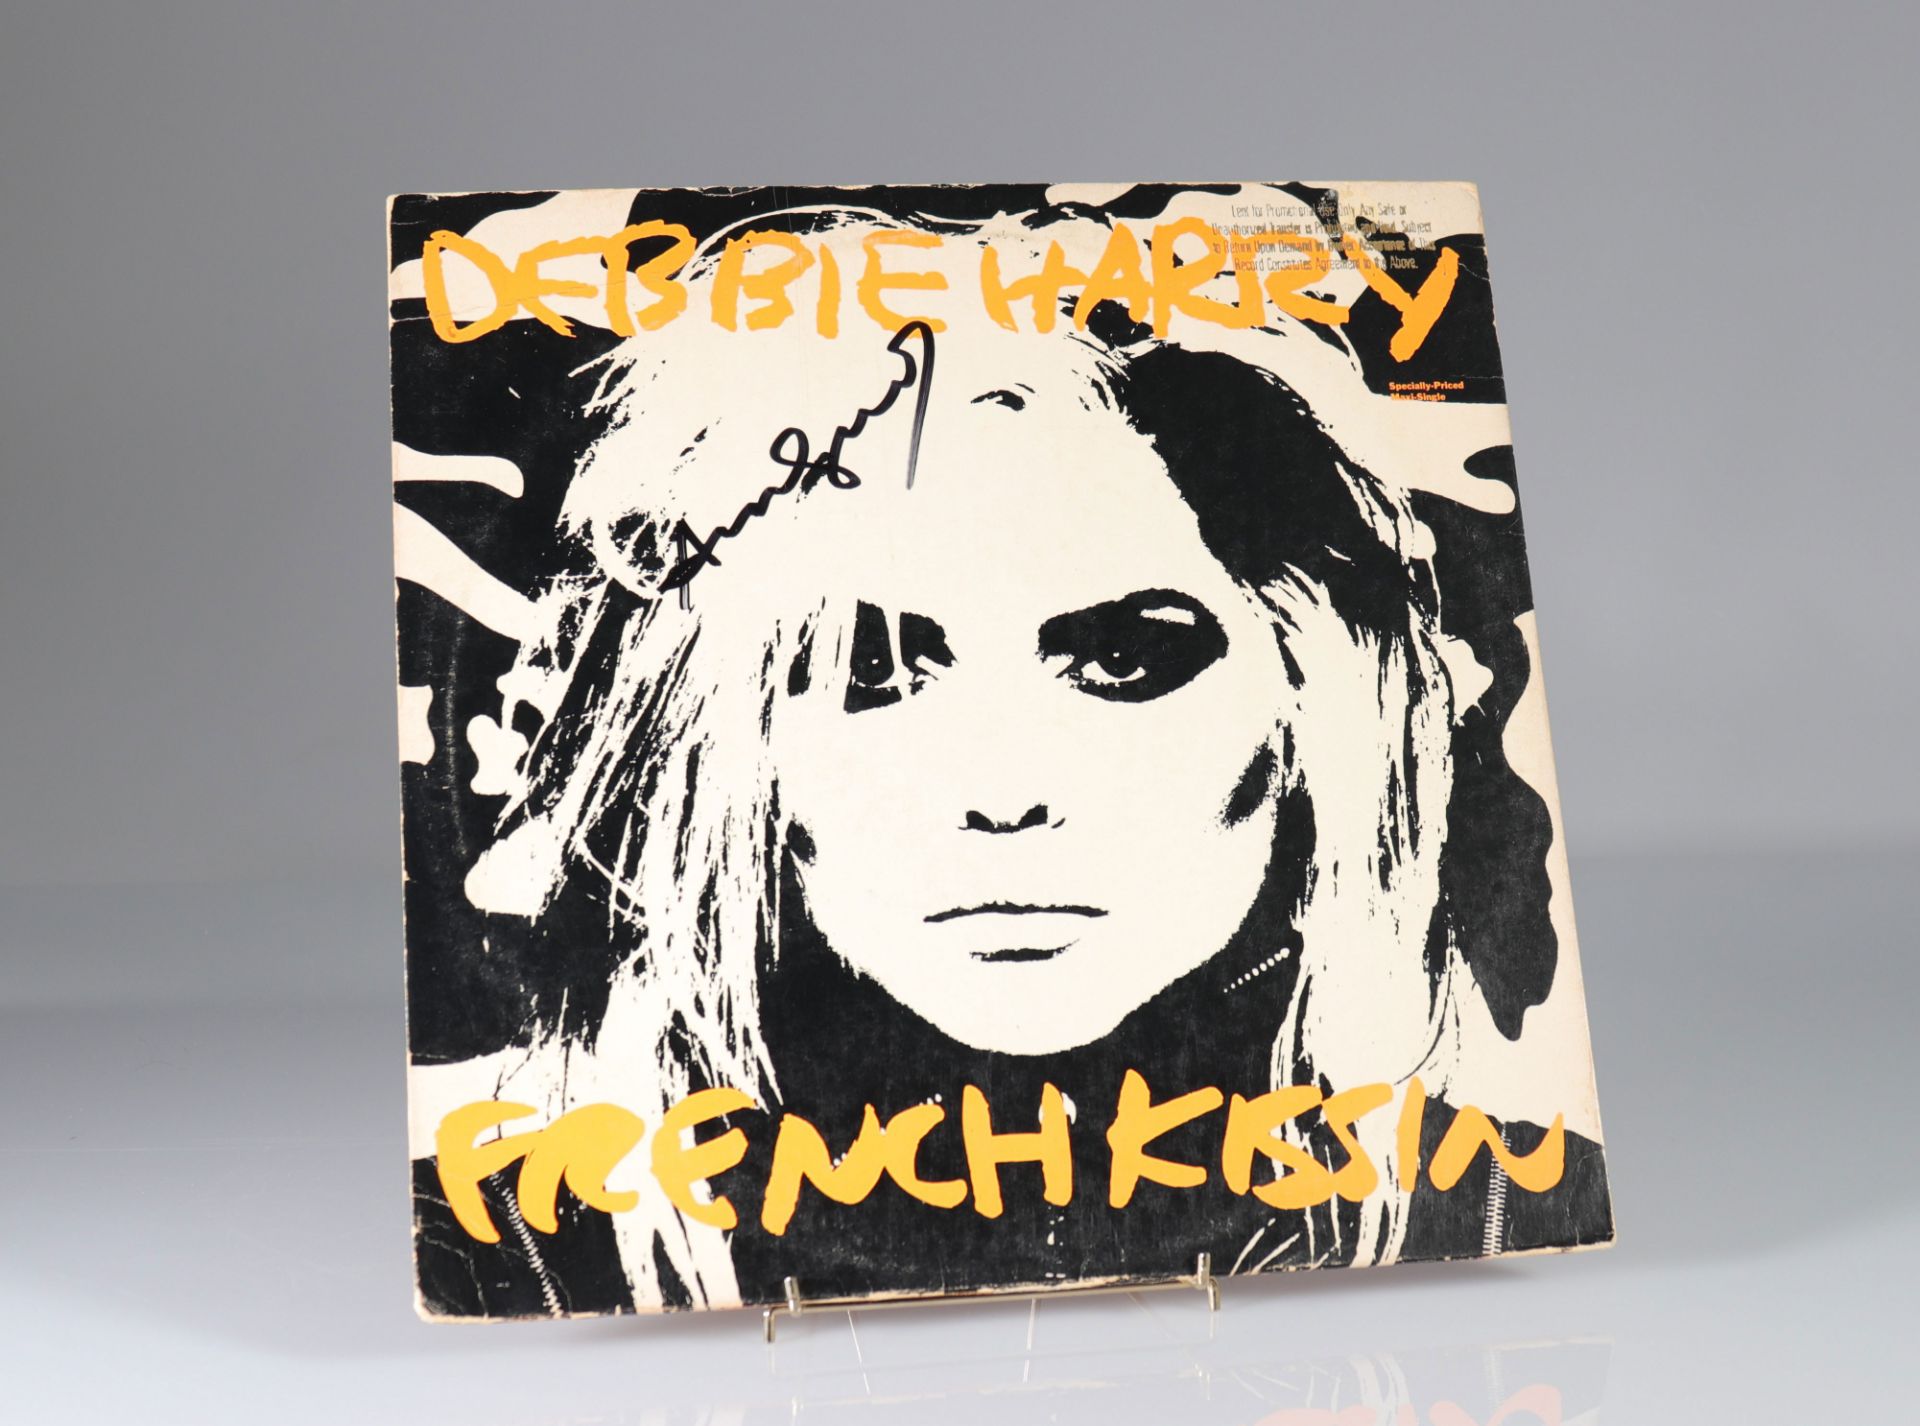 ANDY WARHOL - Debbie Harry - Frenchkissin, 1986 Hand signed by Andy Warhol in black marker on rever